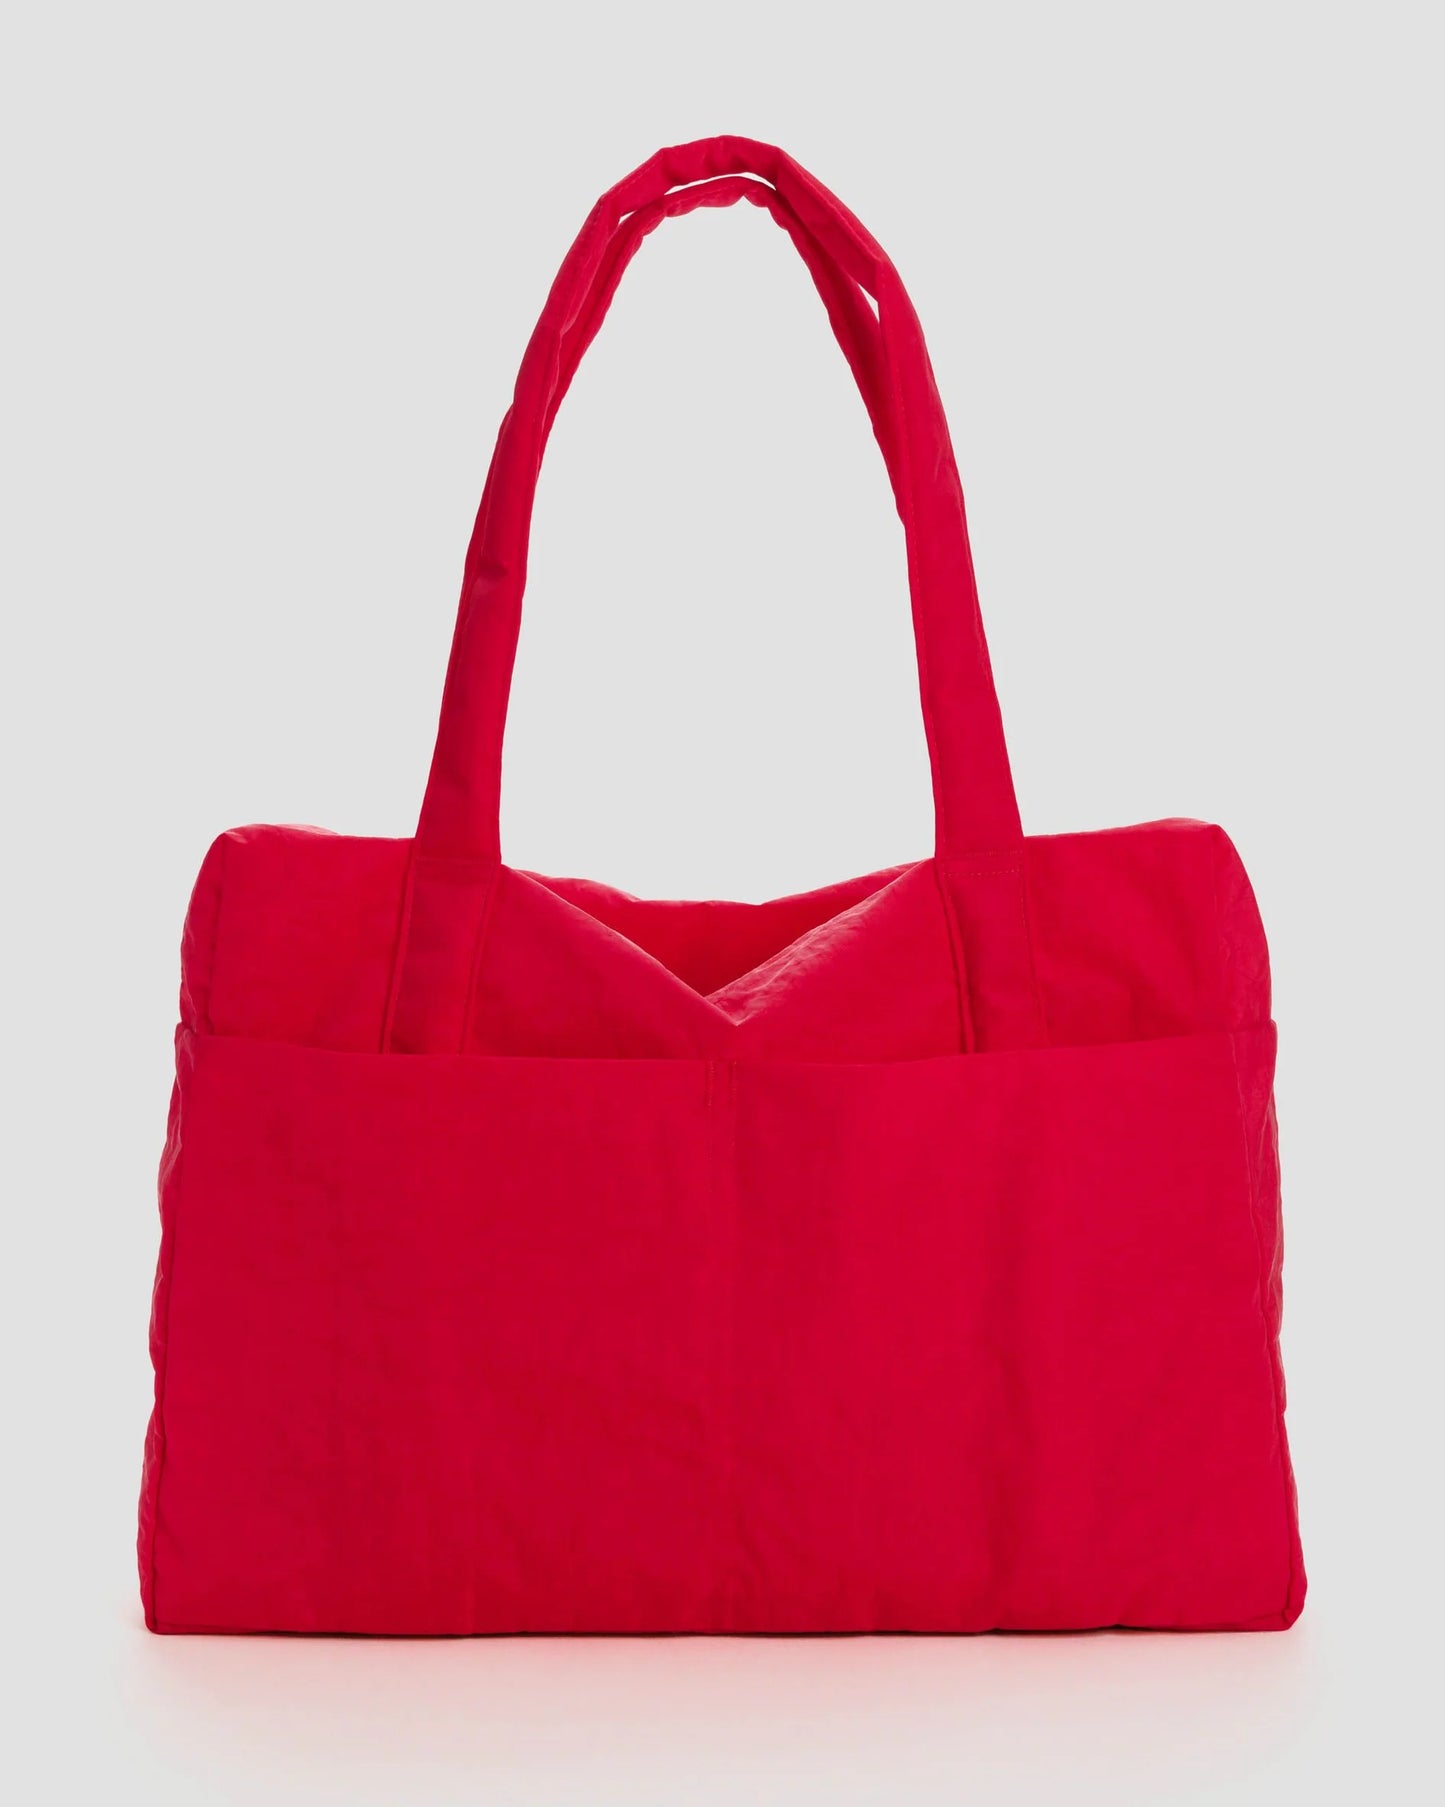 baggu travel carry on bag in candy apple red